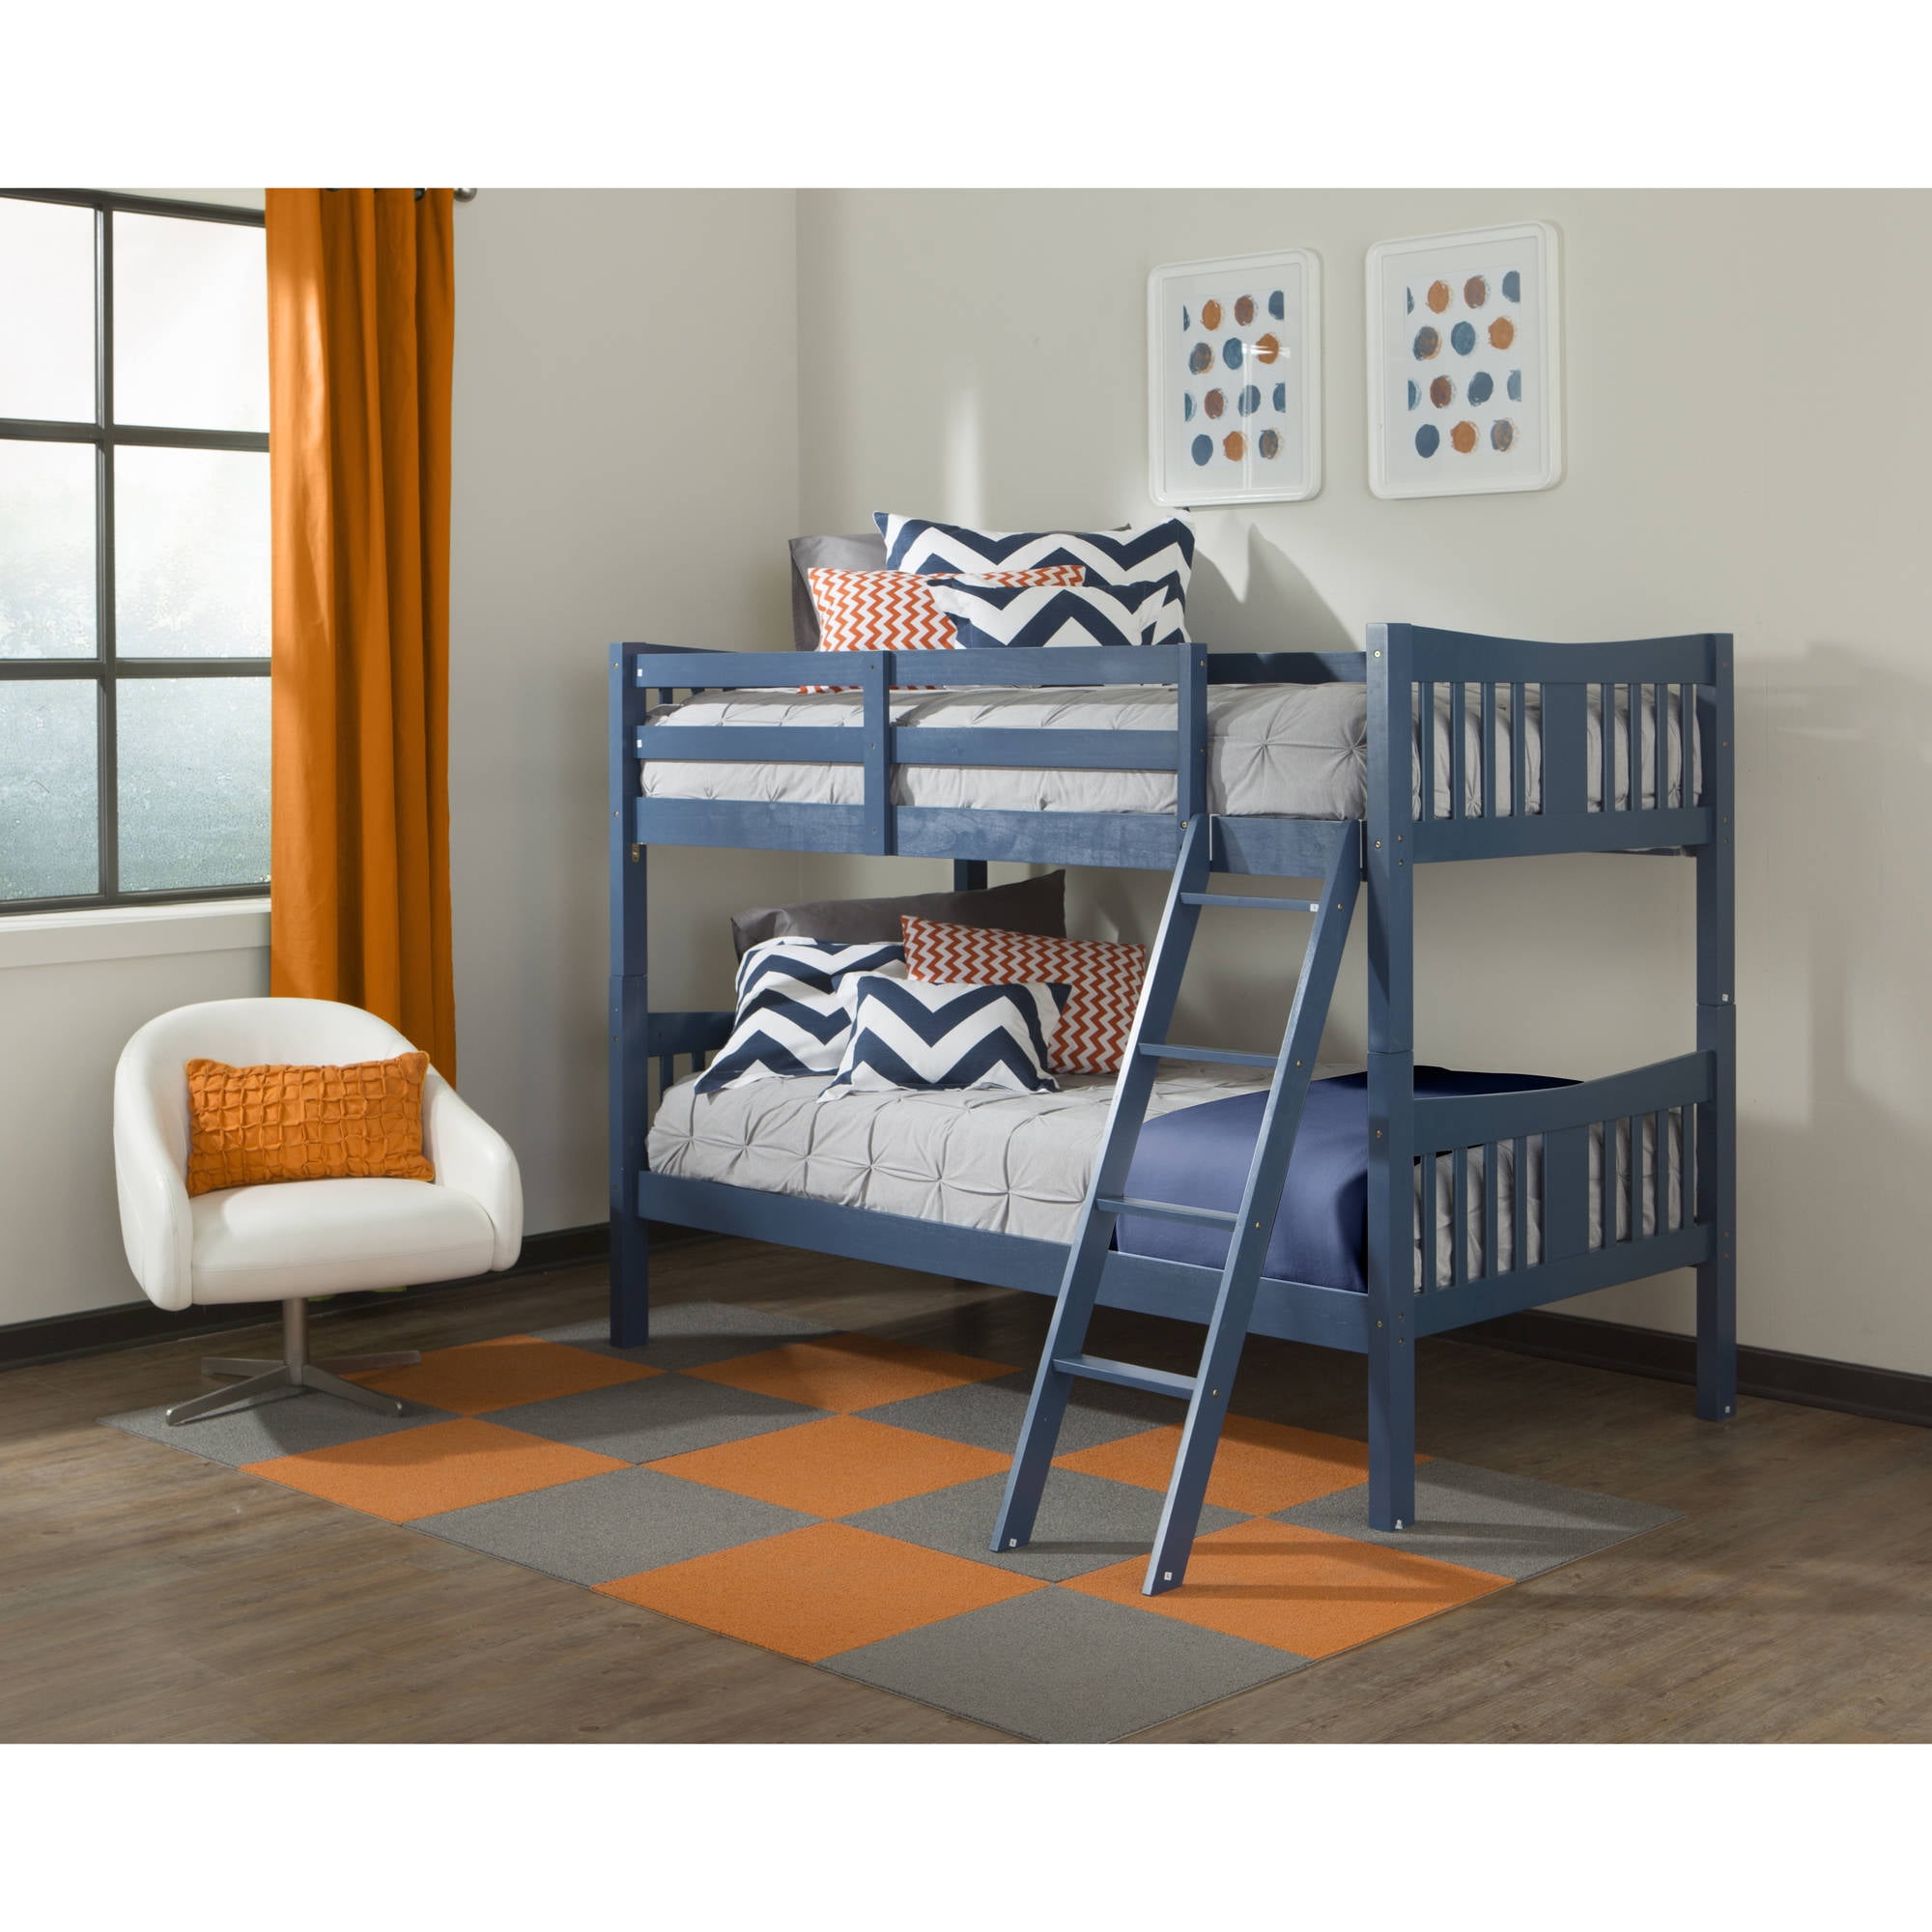 Storkcraft Caribou Twin Over Solid, Storkcraft Caribou Twin Over Solid Hardwood Bunk Bed Gray